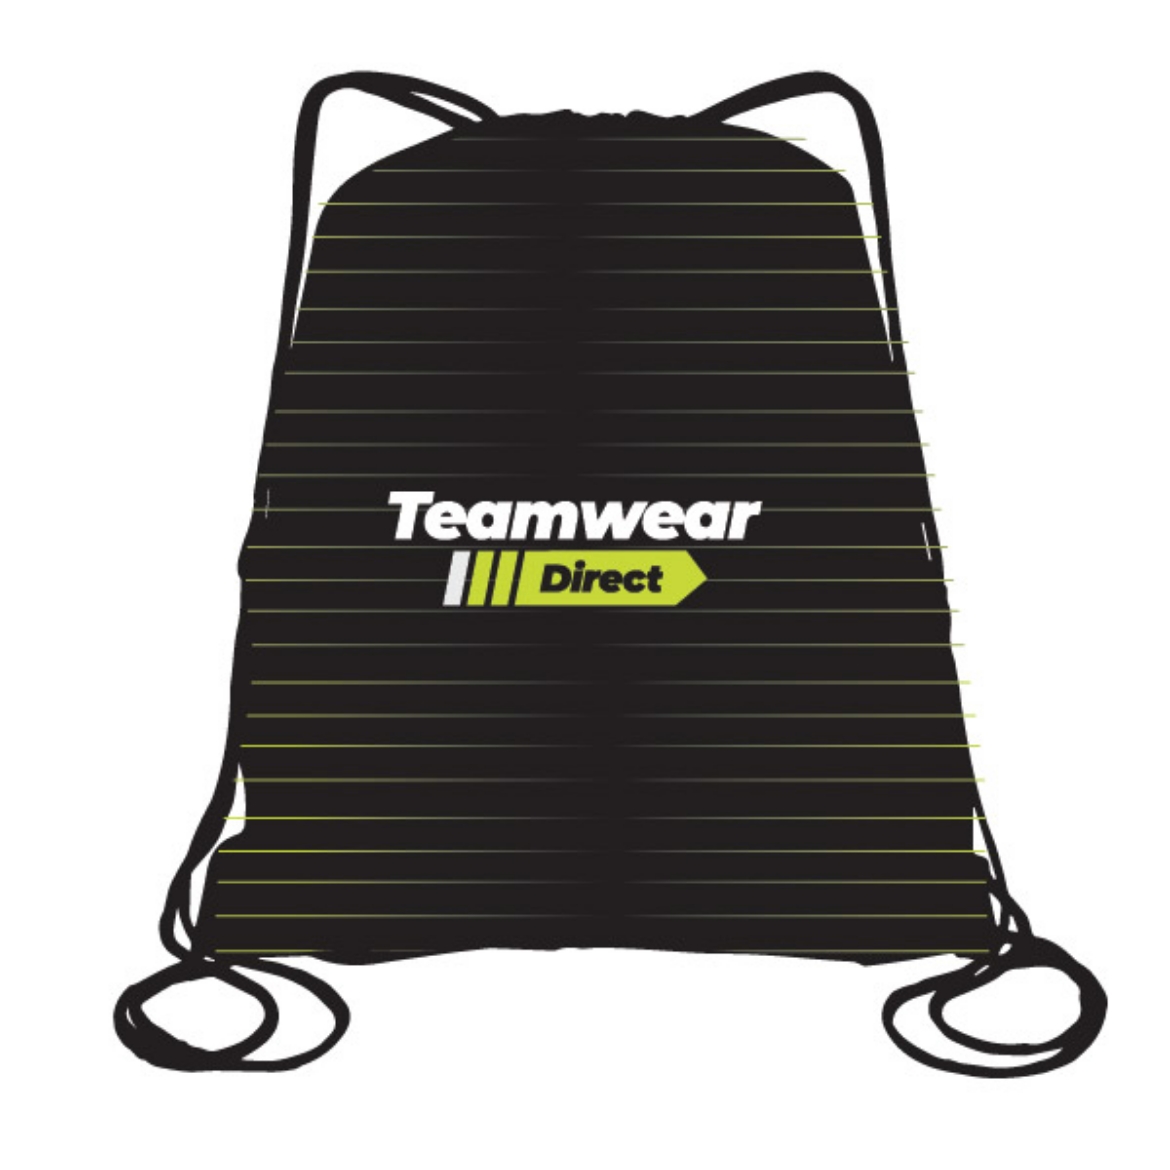 Picture of Teamwear Direct Bag